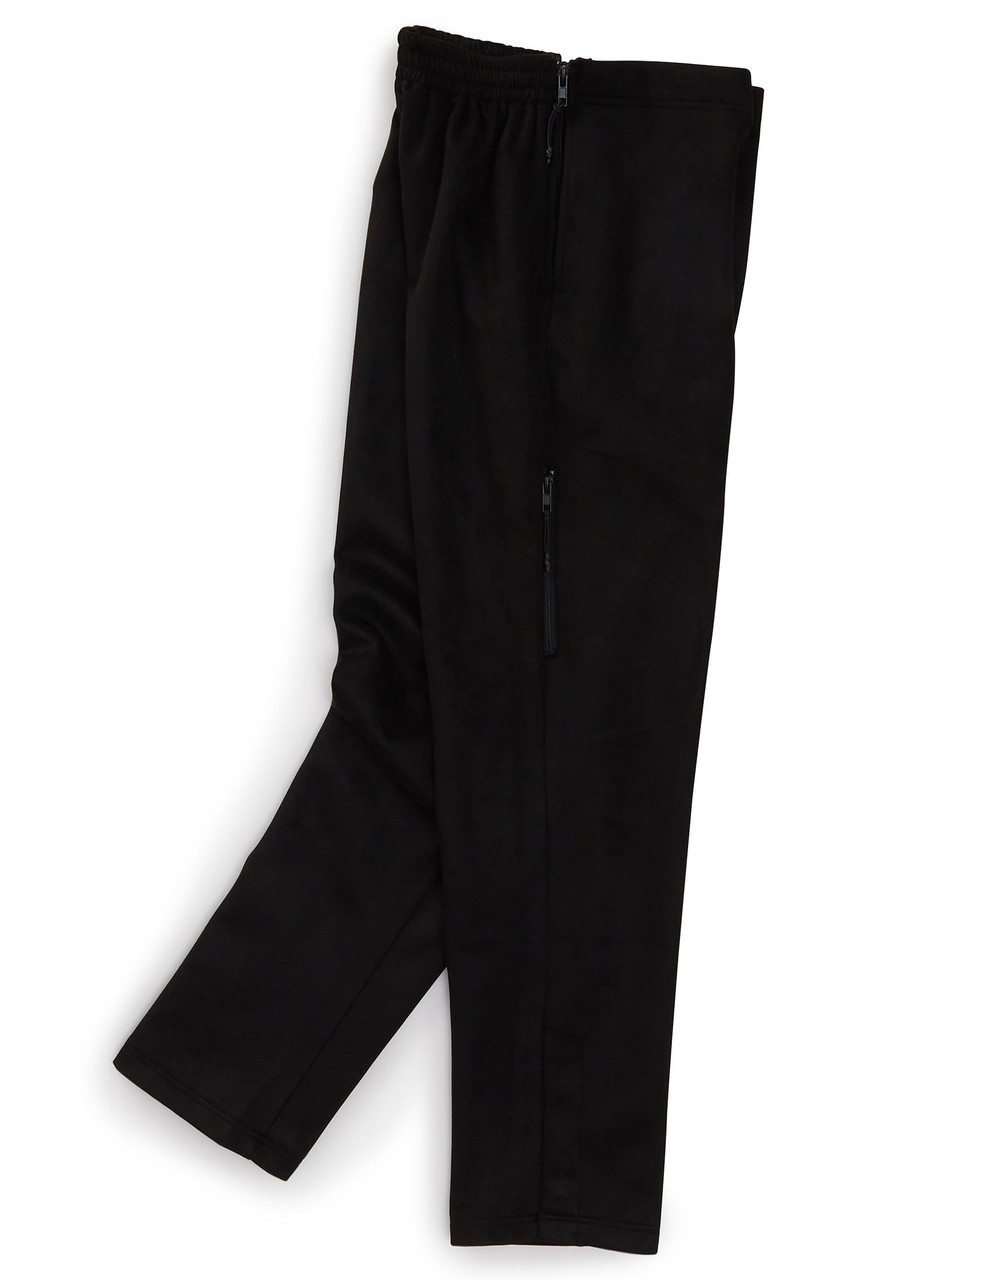 Silverts SV25490 Women's Seated Side Zip Pant with Pull Tabs Black, Size=S, SV25490-SV2-S